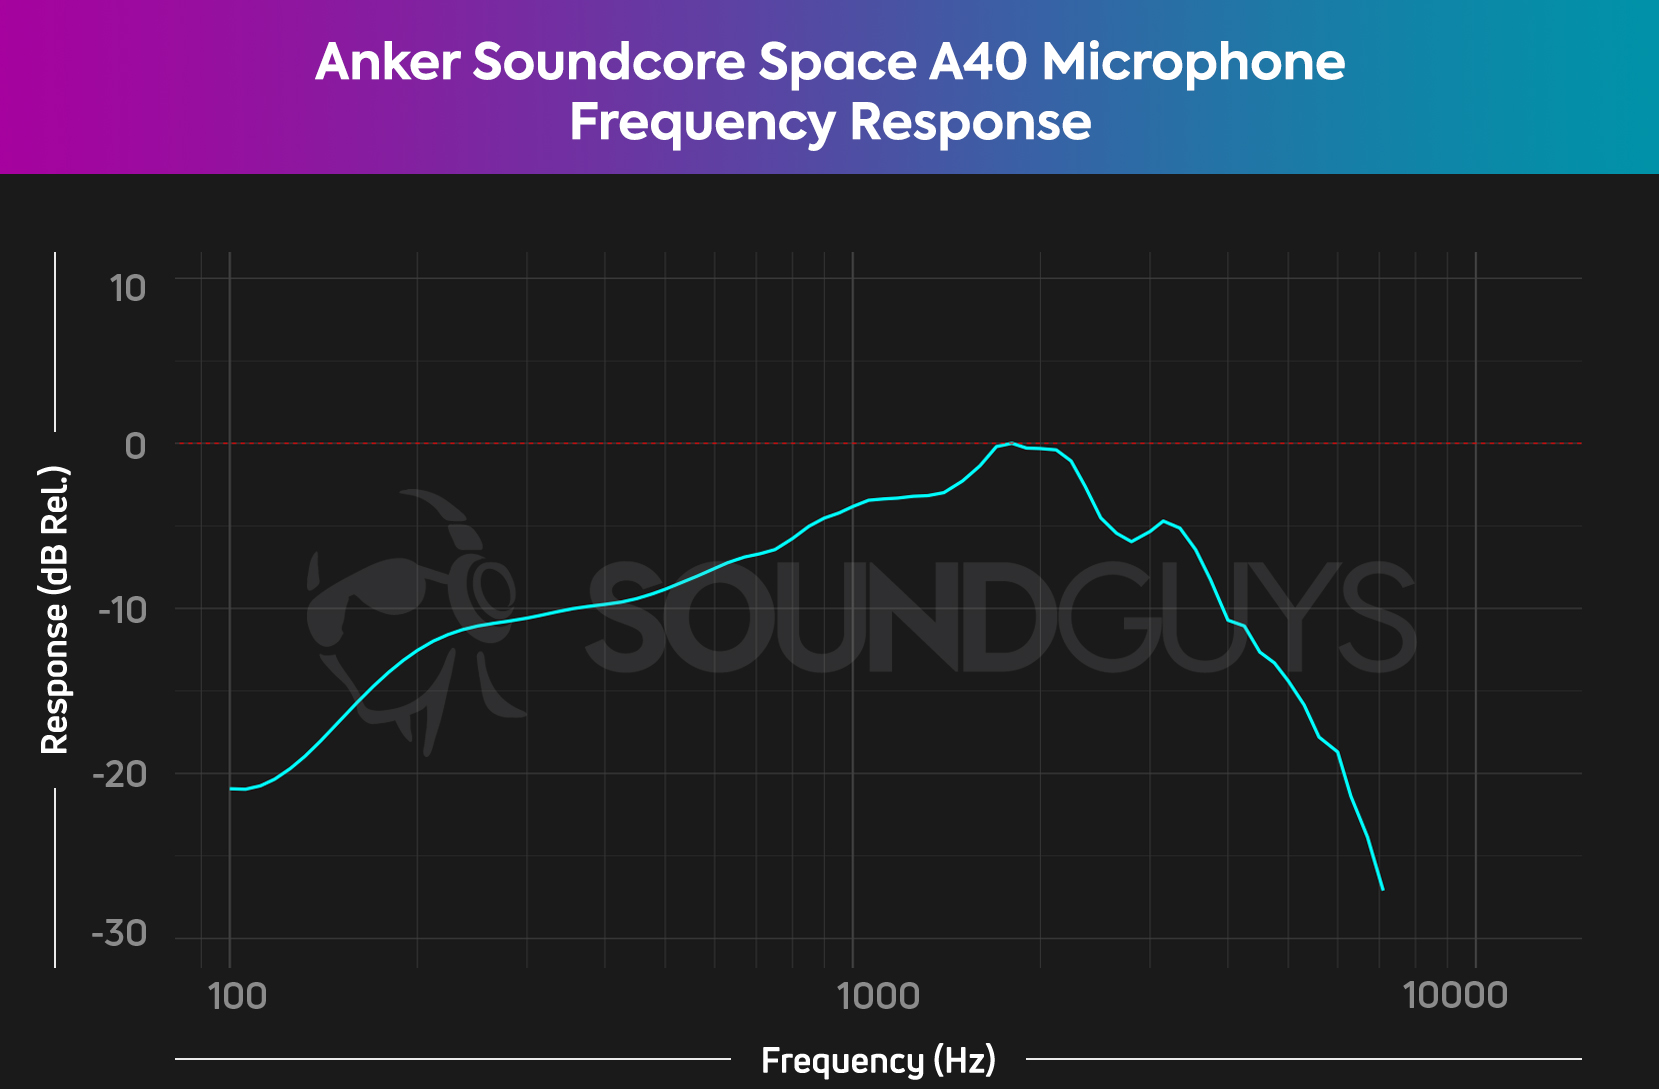 The microphone frequency response chart for the Anker Soundcore Space A40.